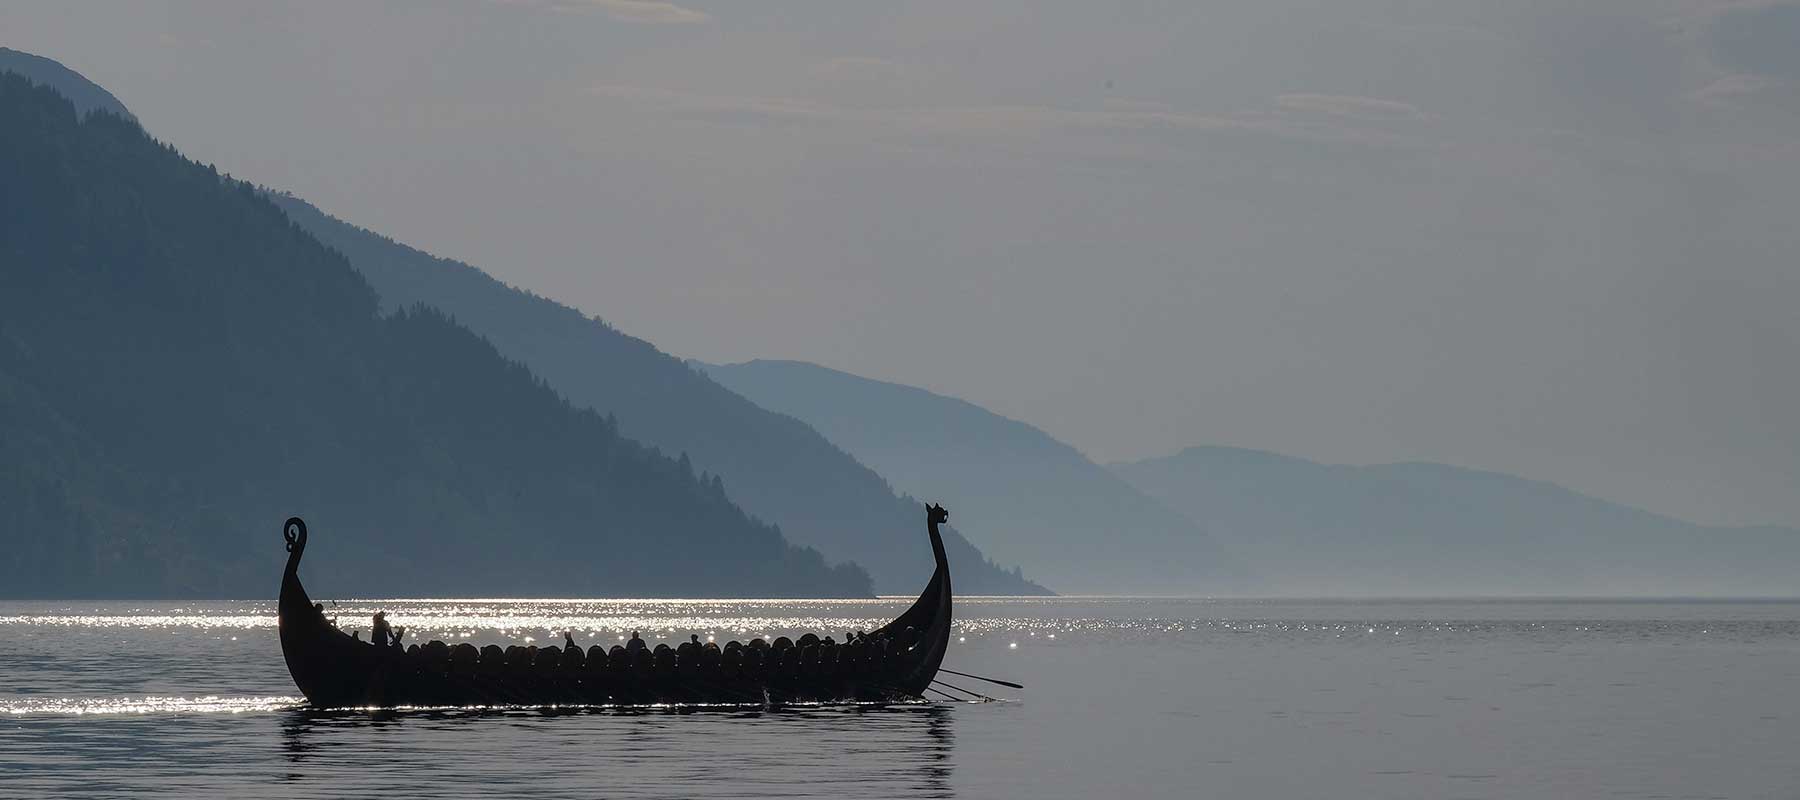 About The Viking Dragon - Background Image of Longship on a Fjord